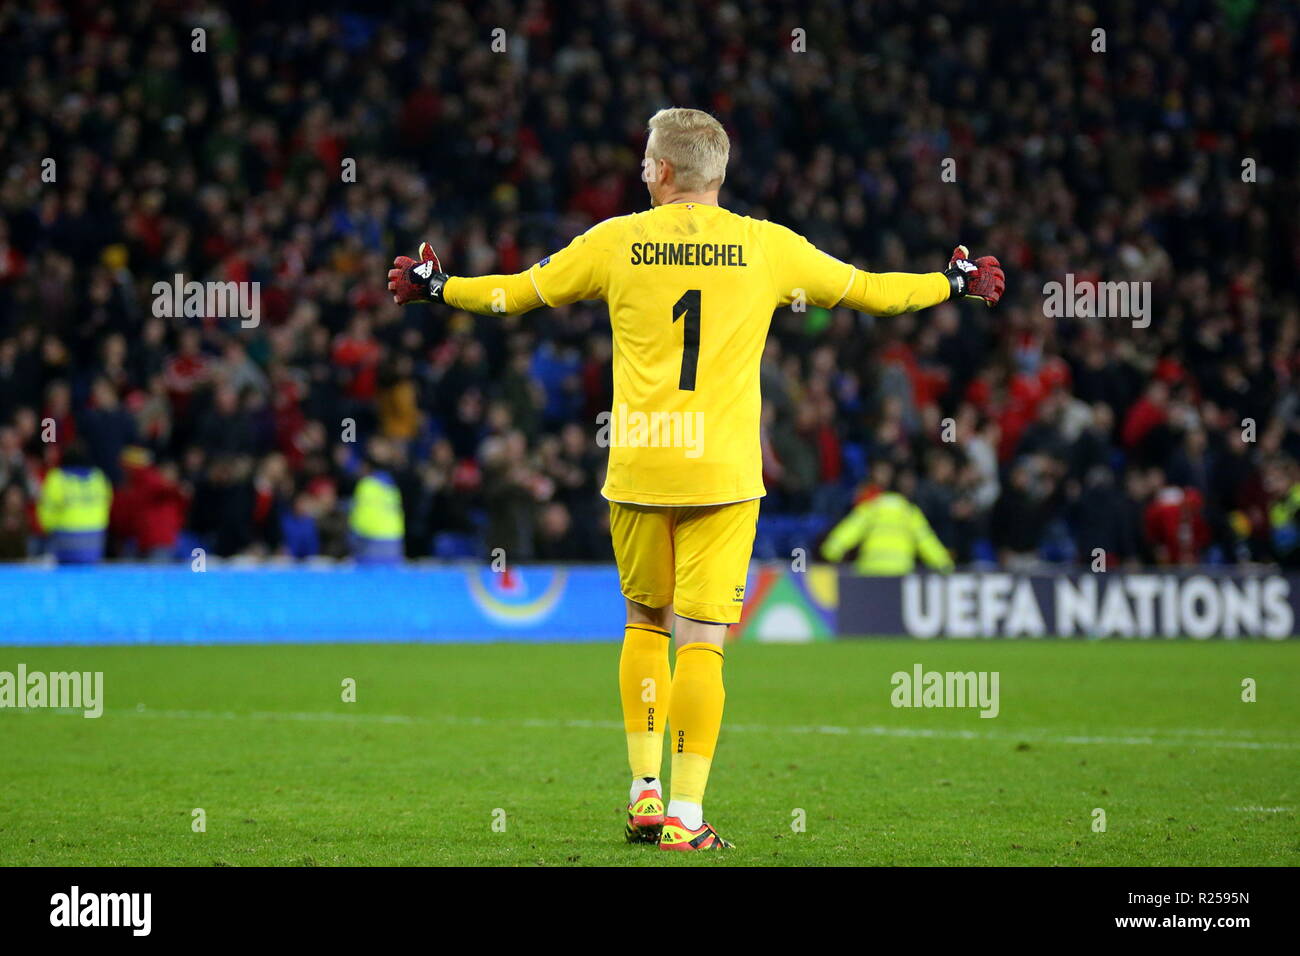 16th November 2018, the UEFA Nations League match Wales v Denmark at the  Cardiff City Stadium. Kasper Peter Schmeichel is a Danish professional  footballer who plays as a goalkeeper for Premier League